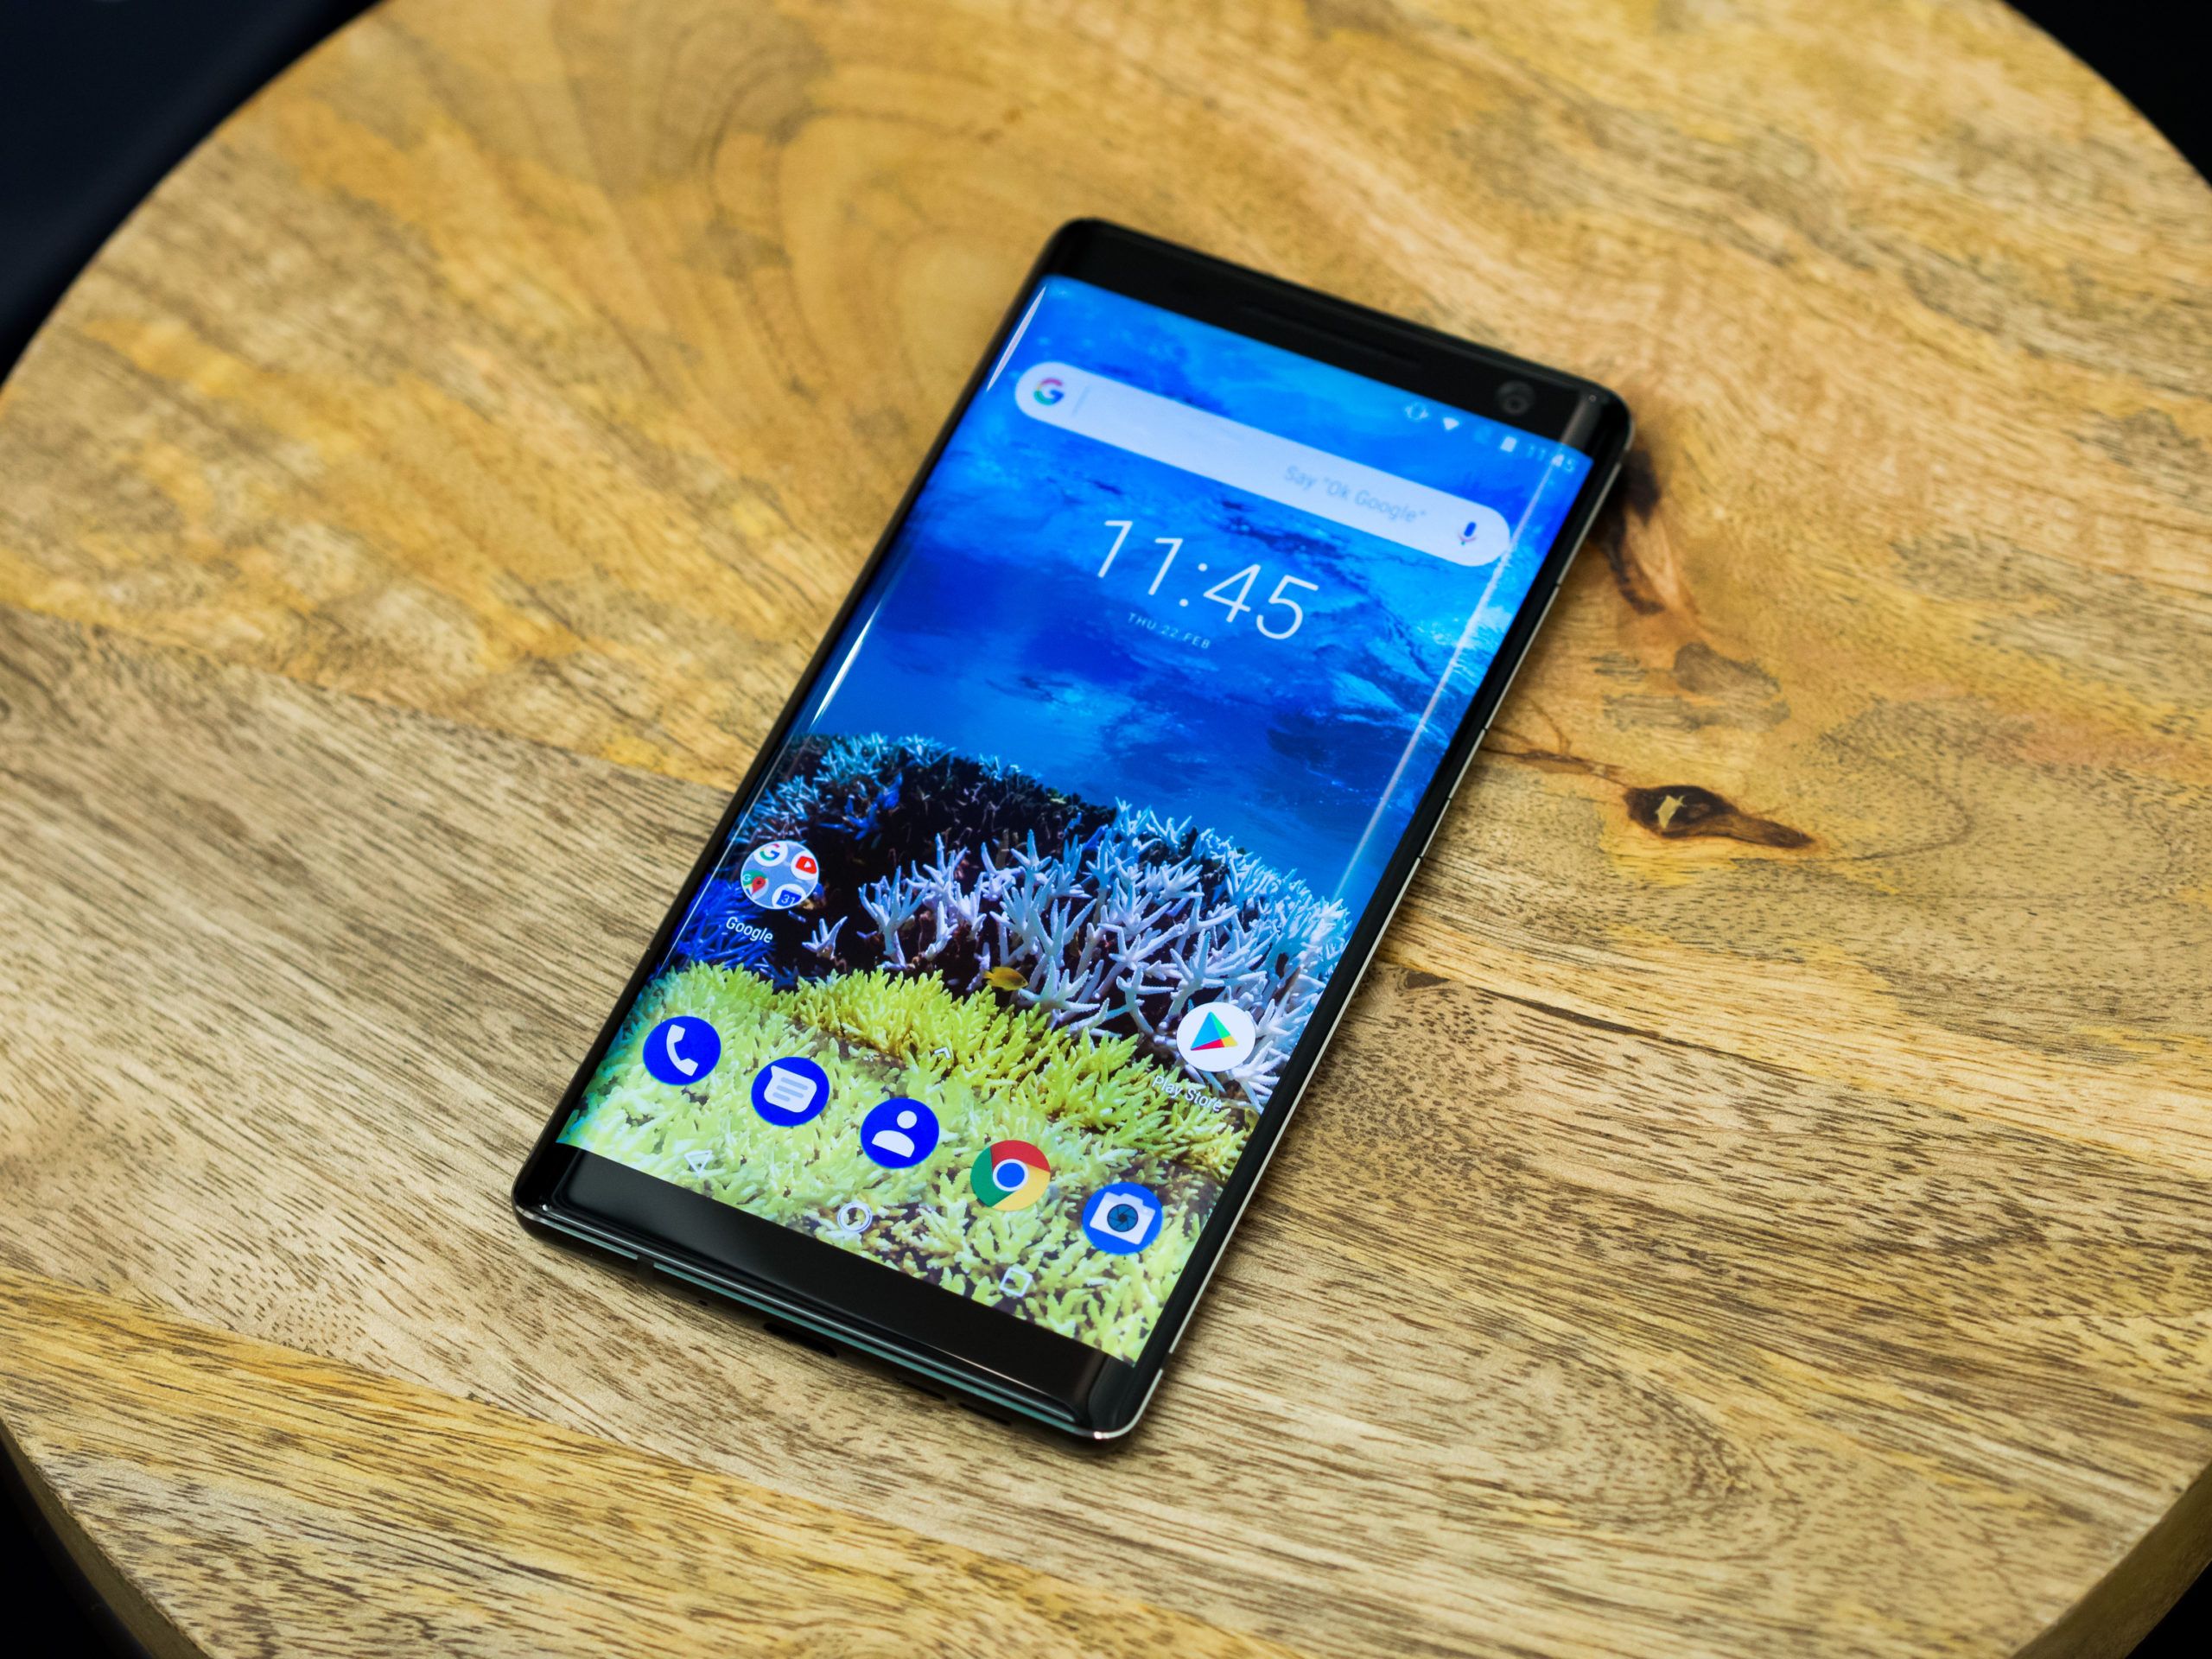 Android 10 starts rolling out to the Nokia 8 Sirocco